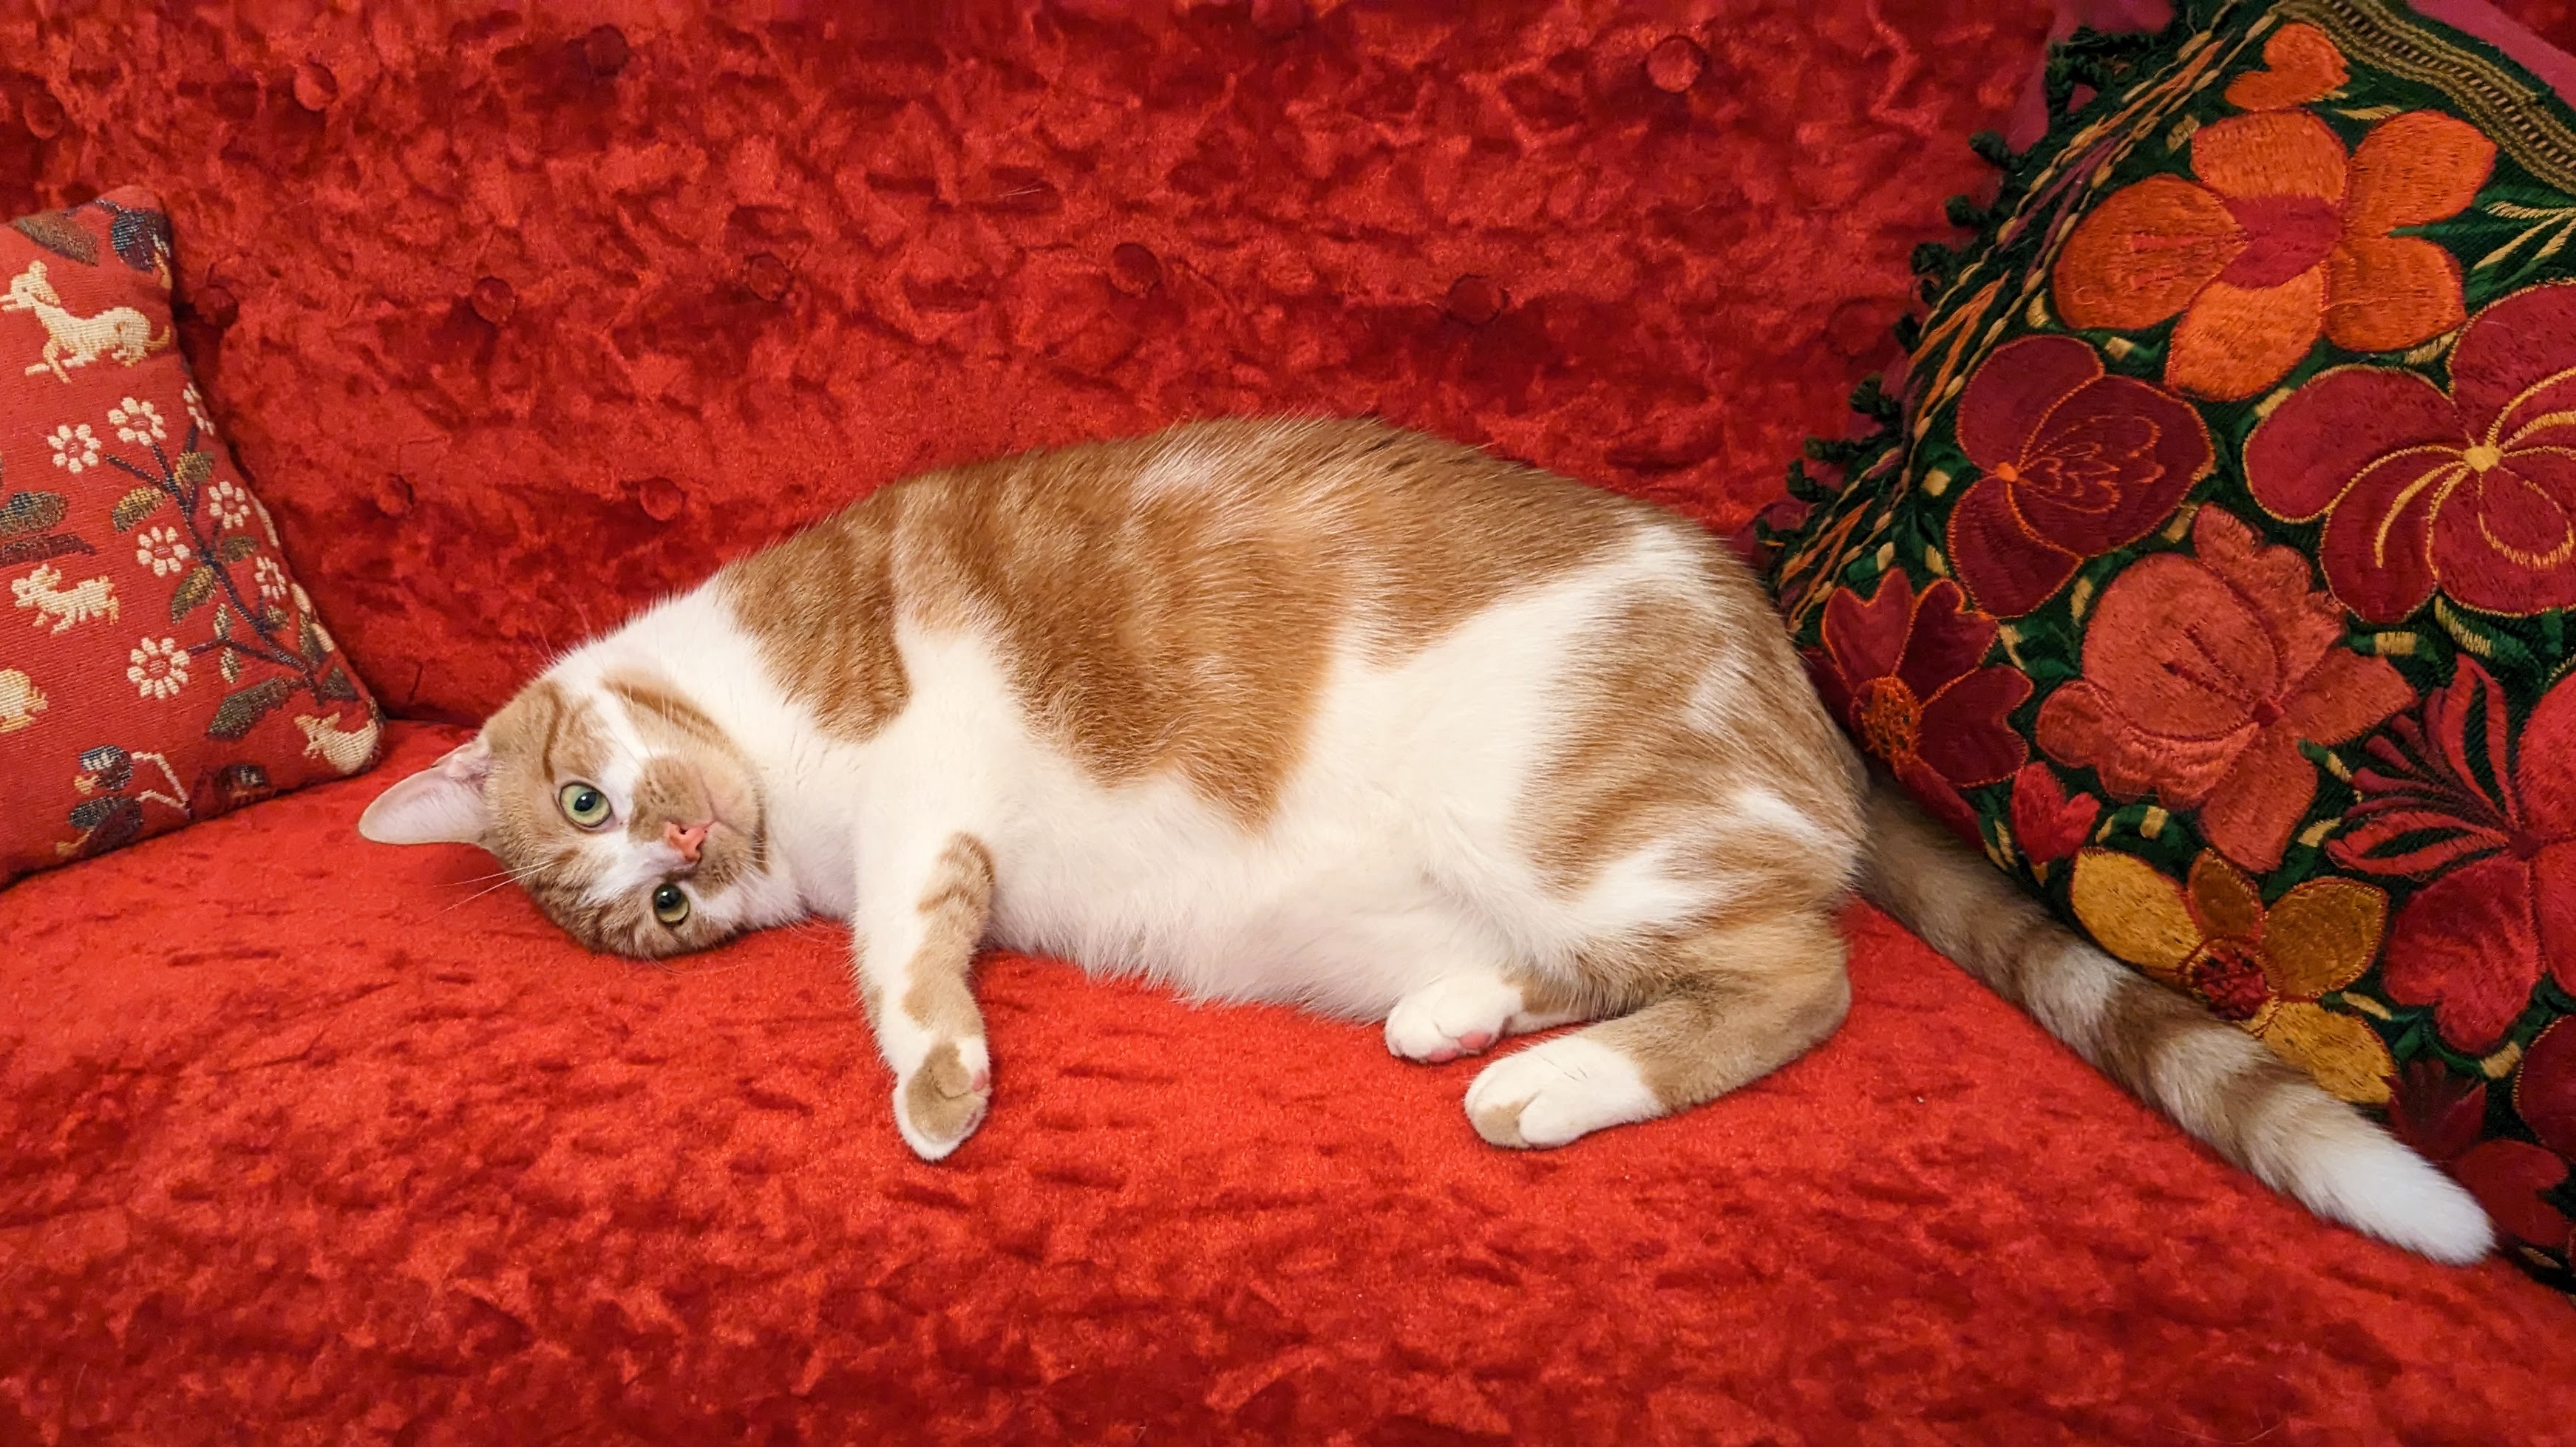 An orange and white cat lounging on a red settee.